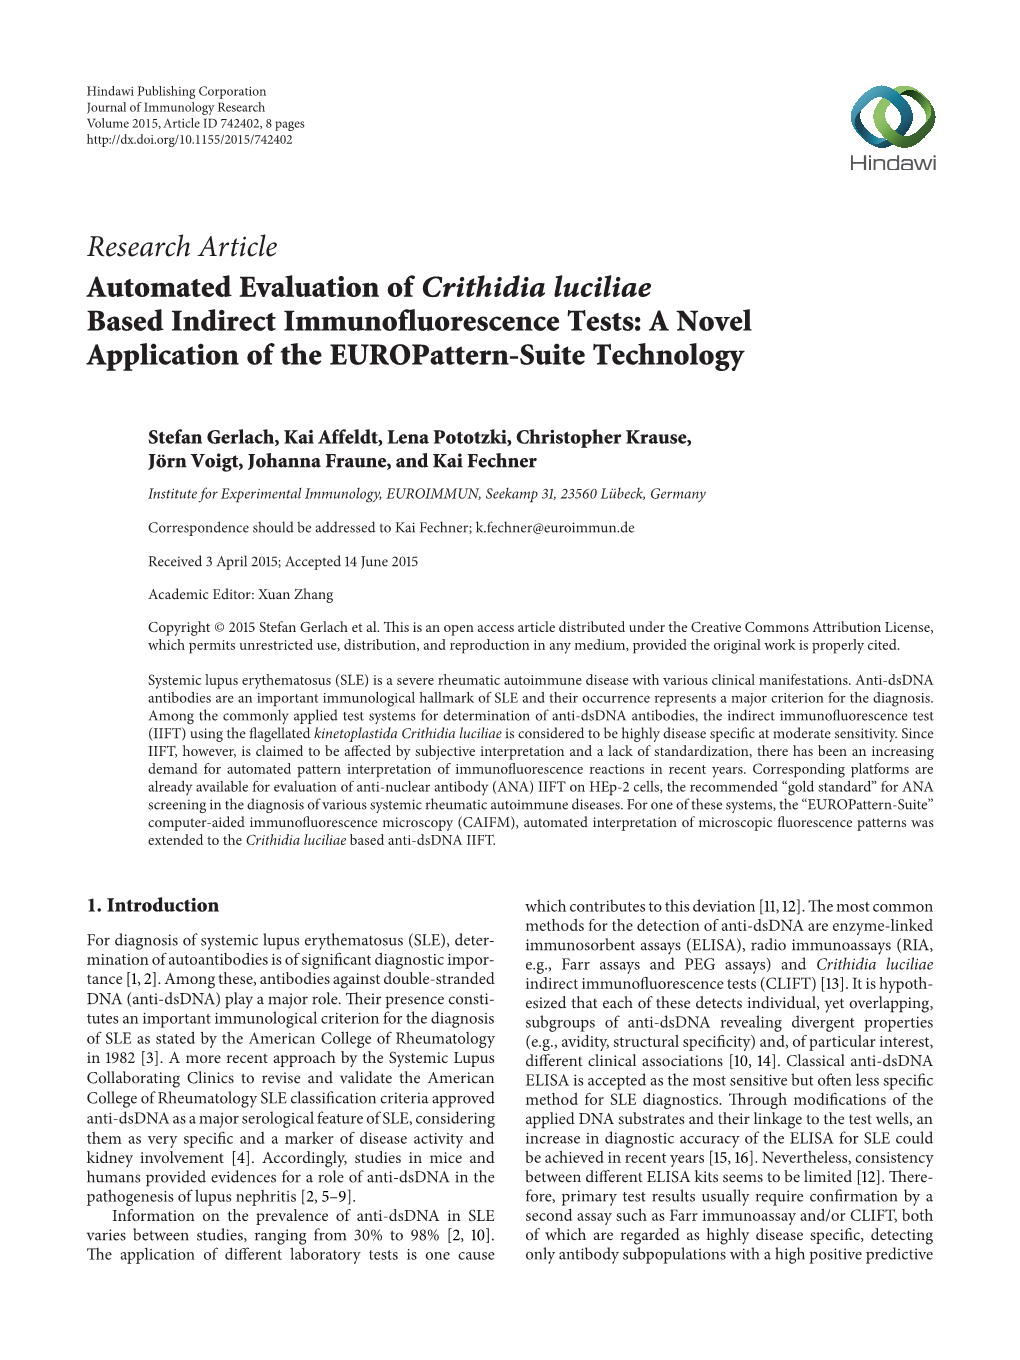 Automated Evaluation of Crithidia Luciliae Based Indirect Immunofluorescence Tests: a Novel Application of the Europattern-Suite Technology